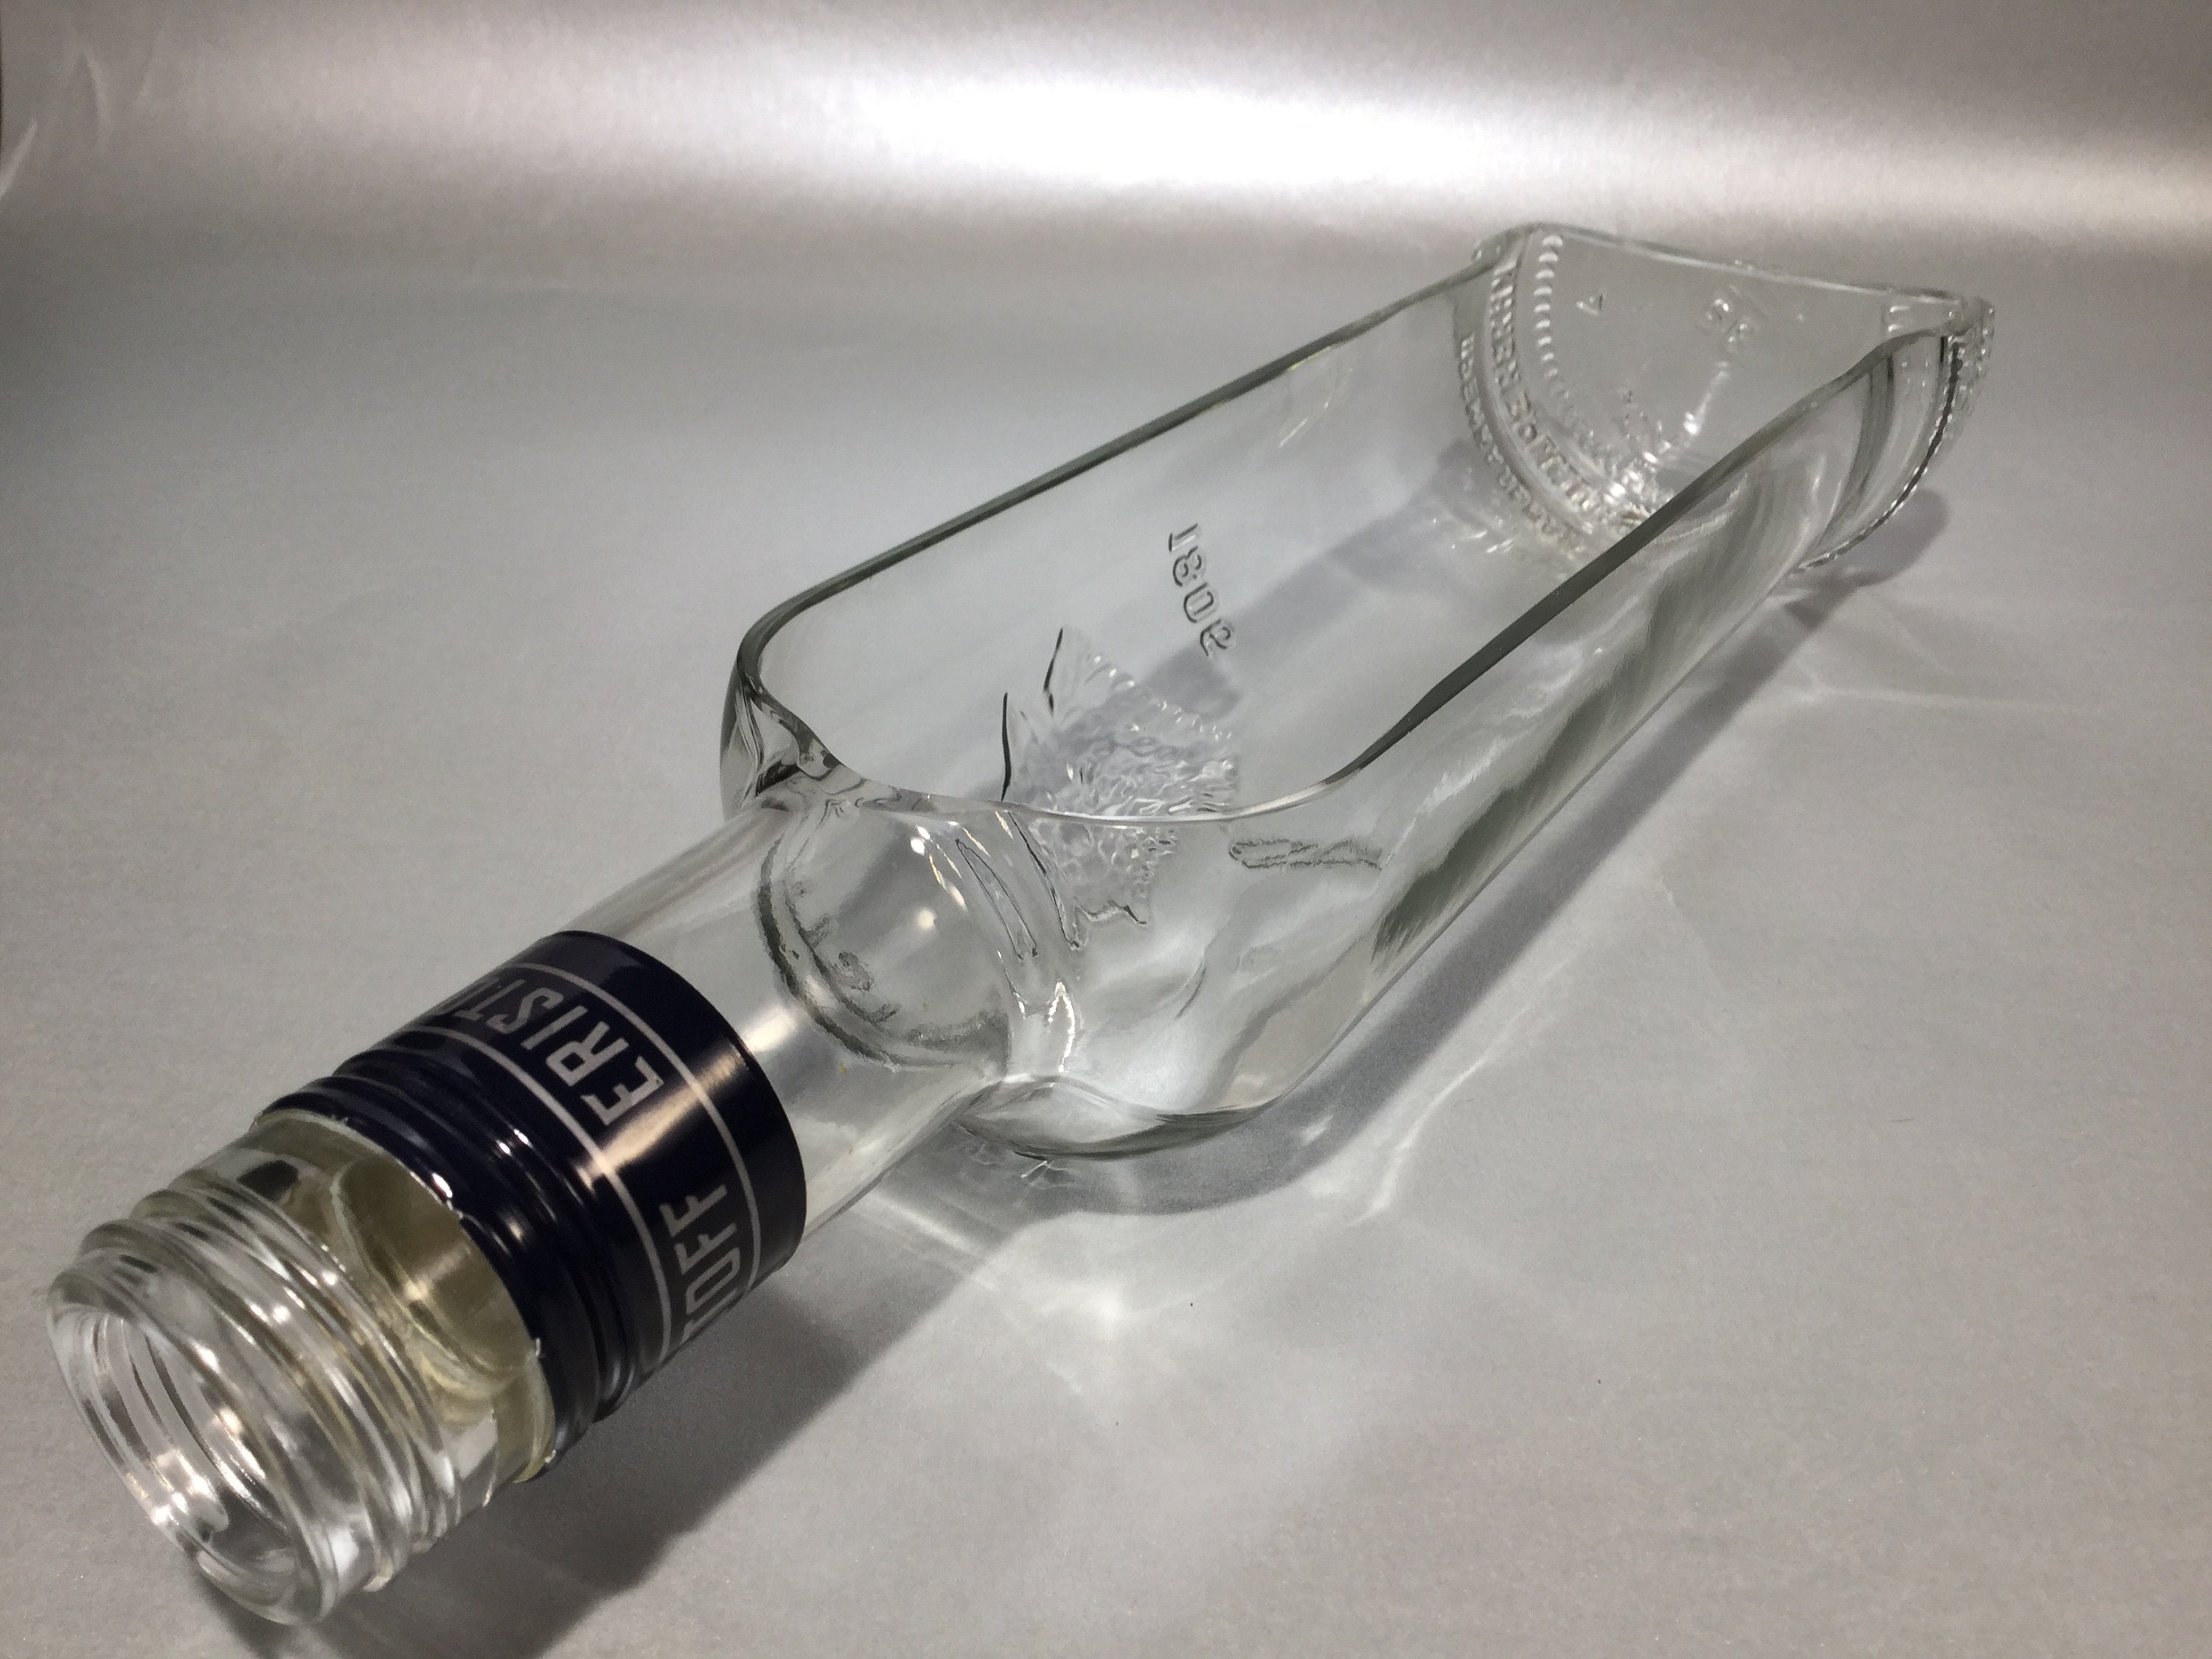 Plat, Bouteille Coupee, Vodka Eristoff, Recyclage, Upcycling, Recycling, Aperitif, Vase, Idee Cadeau